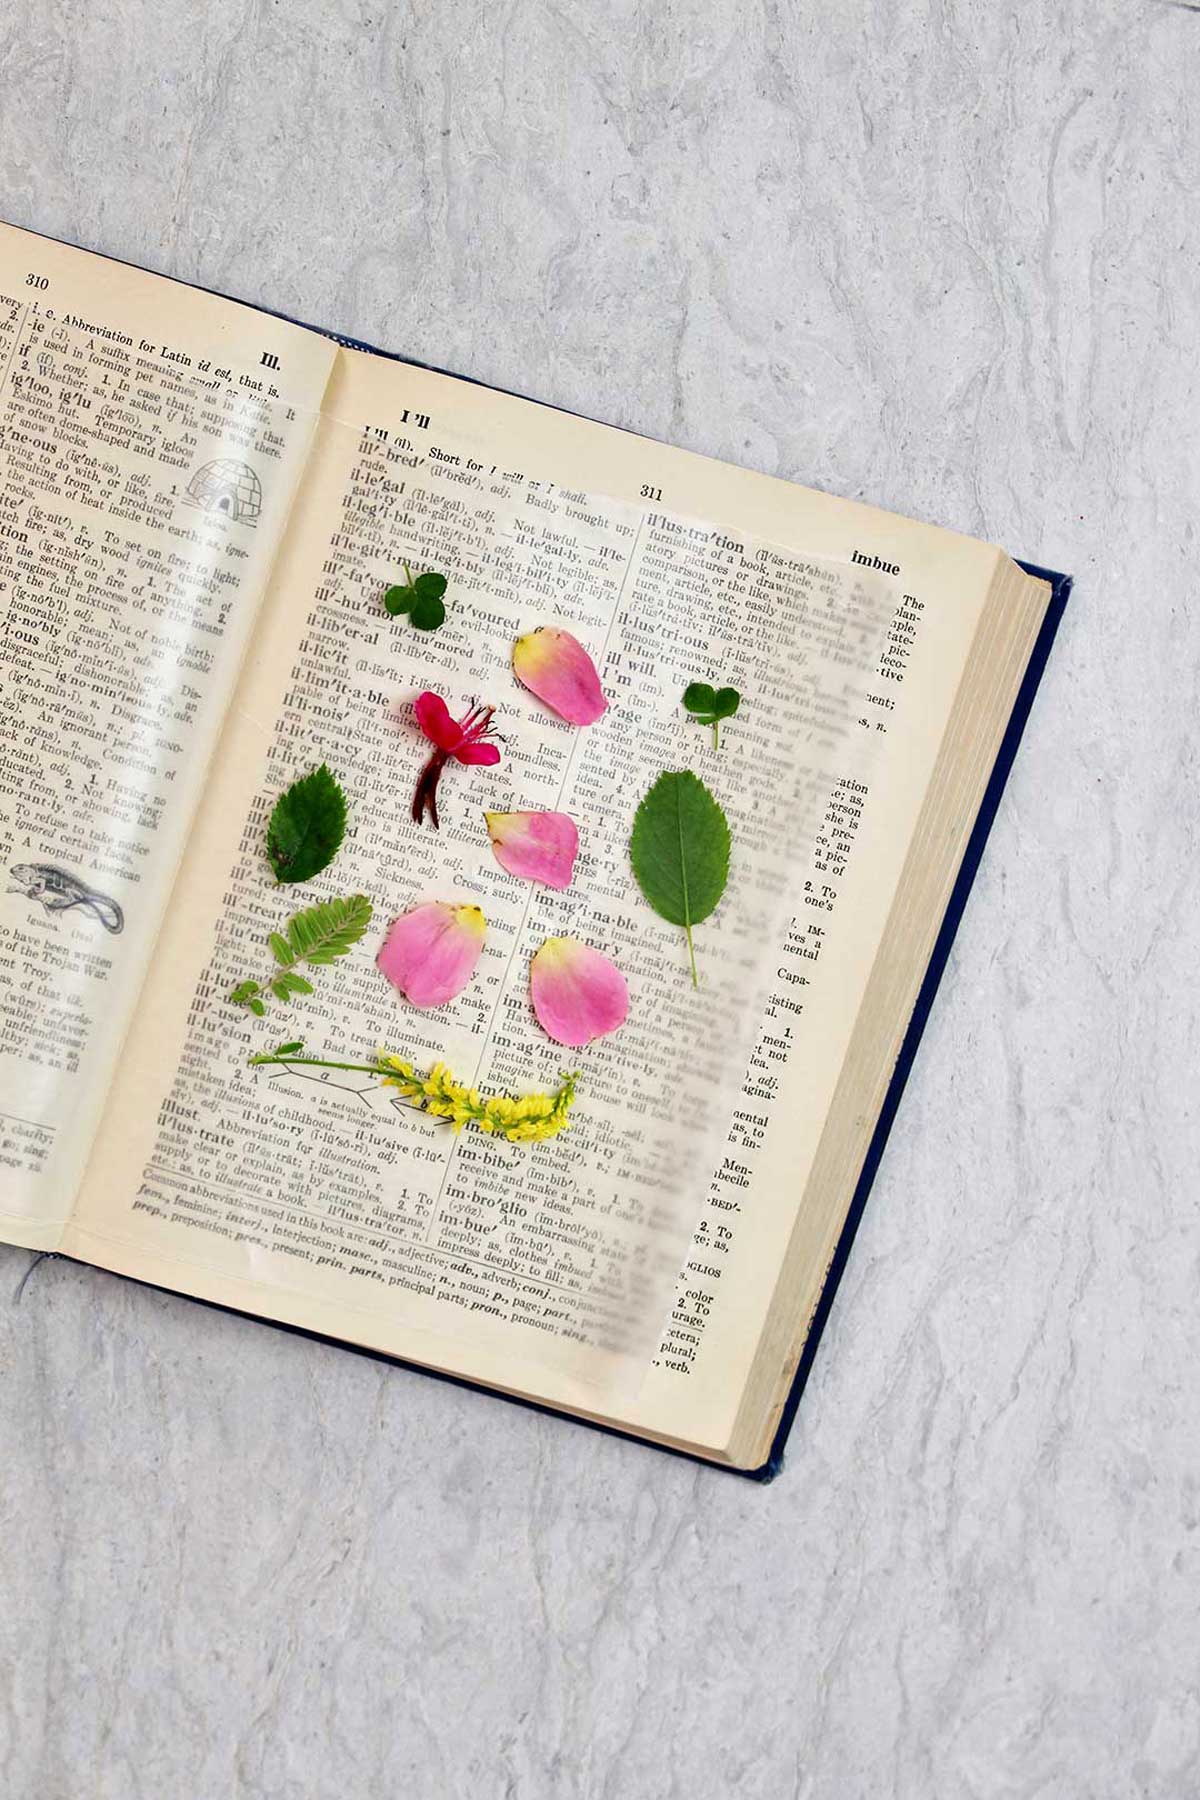 Opened dictionary with wax paper and dried flowers and leaves.